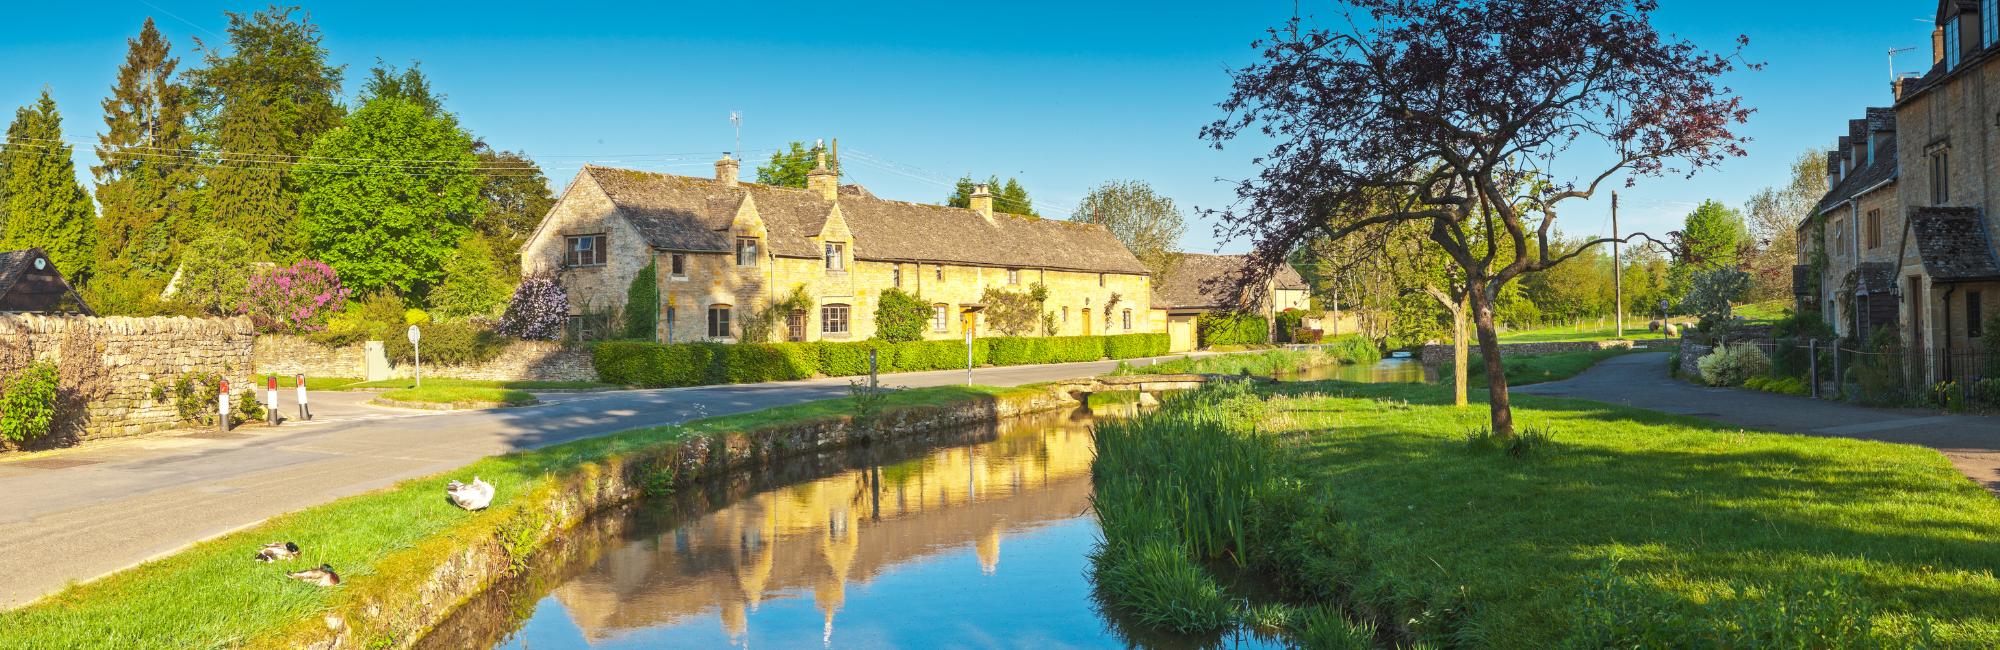 Cotswolds by Bike - 7 days